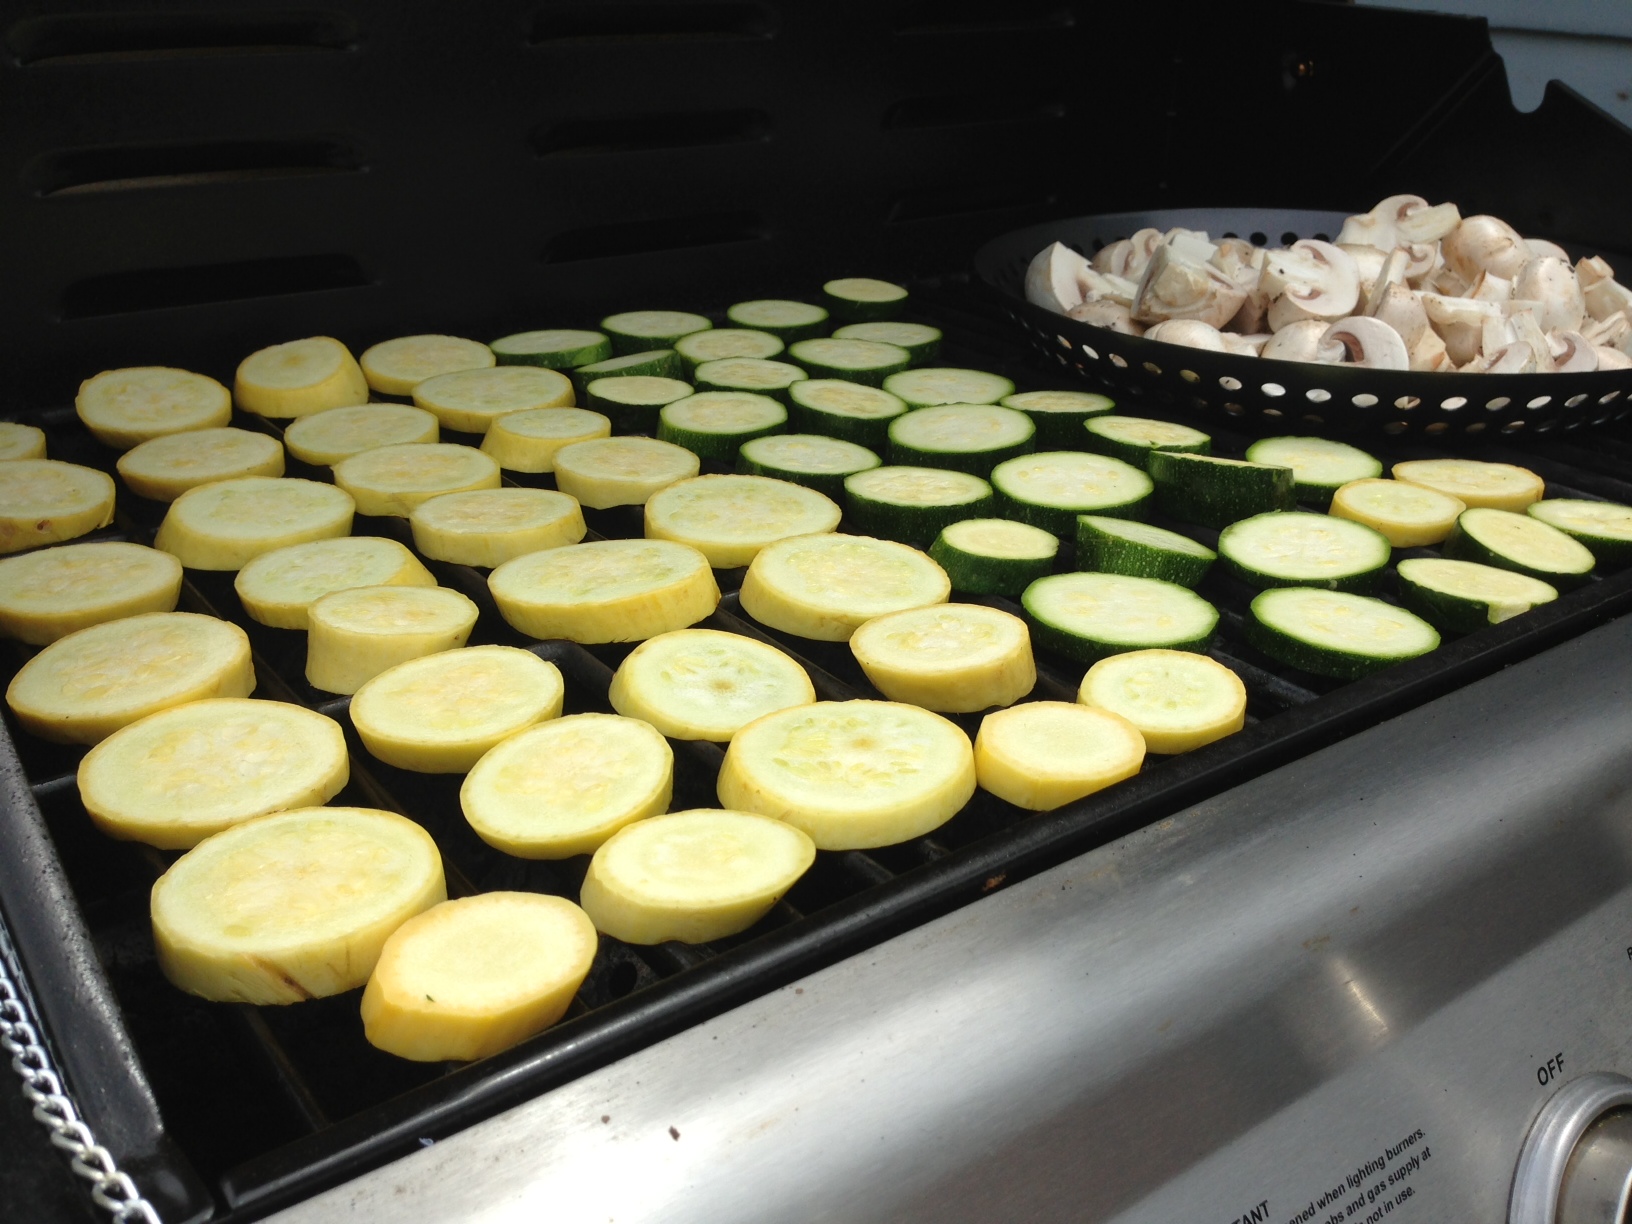 Grilled Veggies On The BBQ!